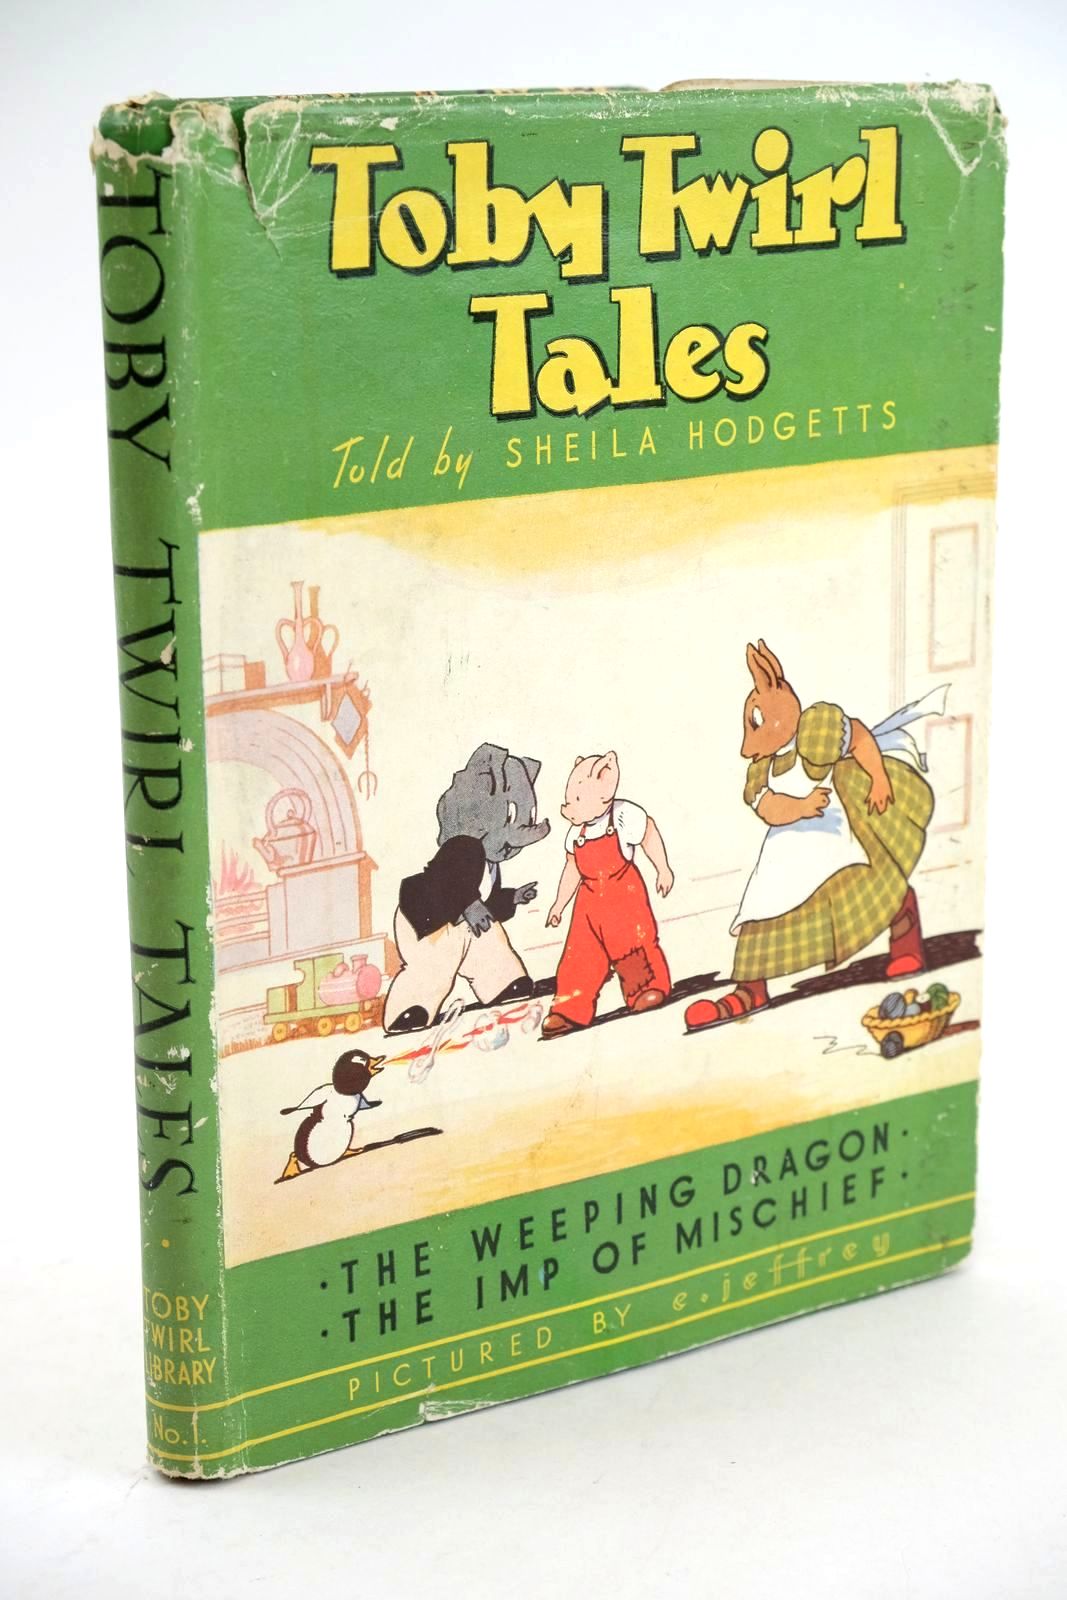 Photo of TOBY TWIRL TALES No. 1 written by Hodgetts, Sheila illustrated by Jeffrey, E. published by Sampson Low, Marston & Co. Ltd. (STOCK CODE: 1324071)  for sale by Stella & Rose's Books